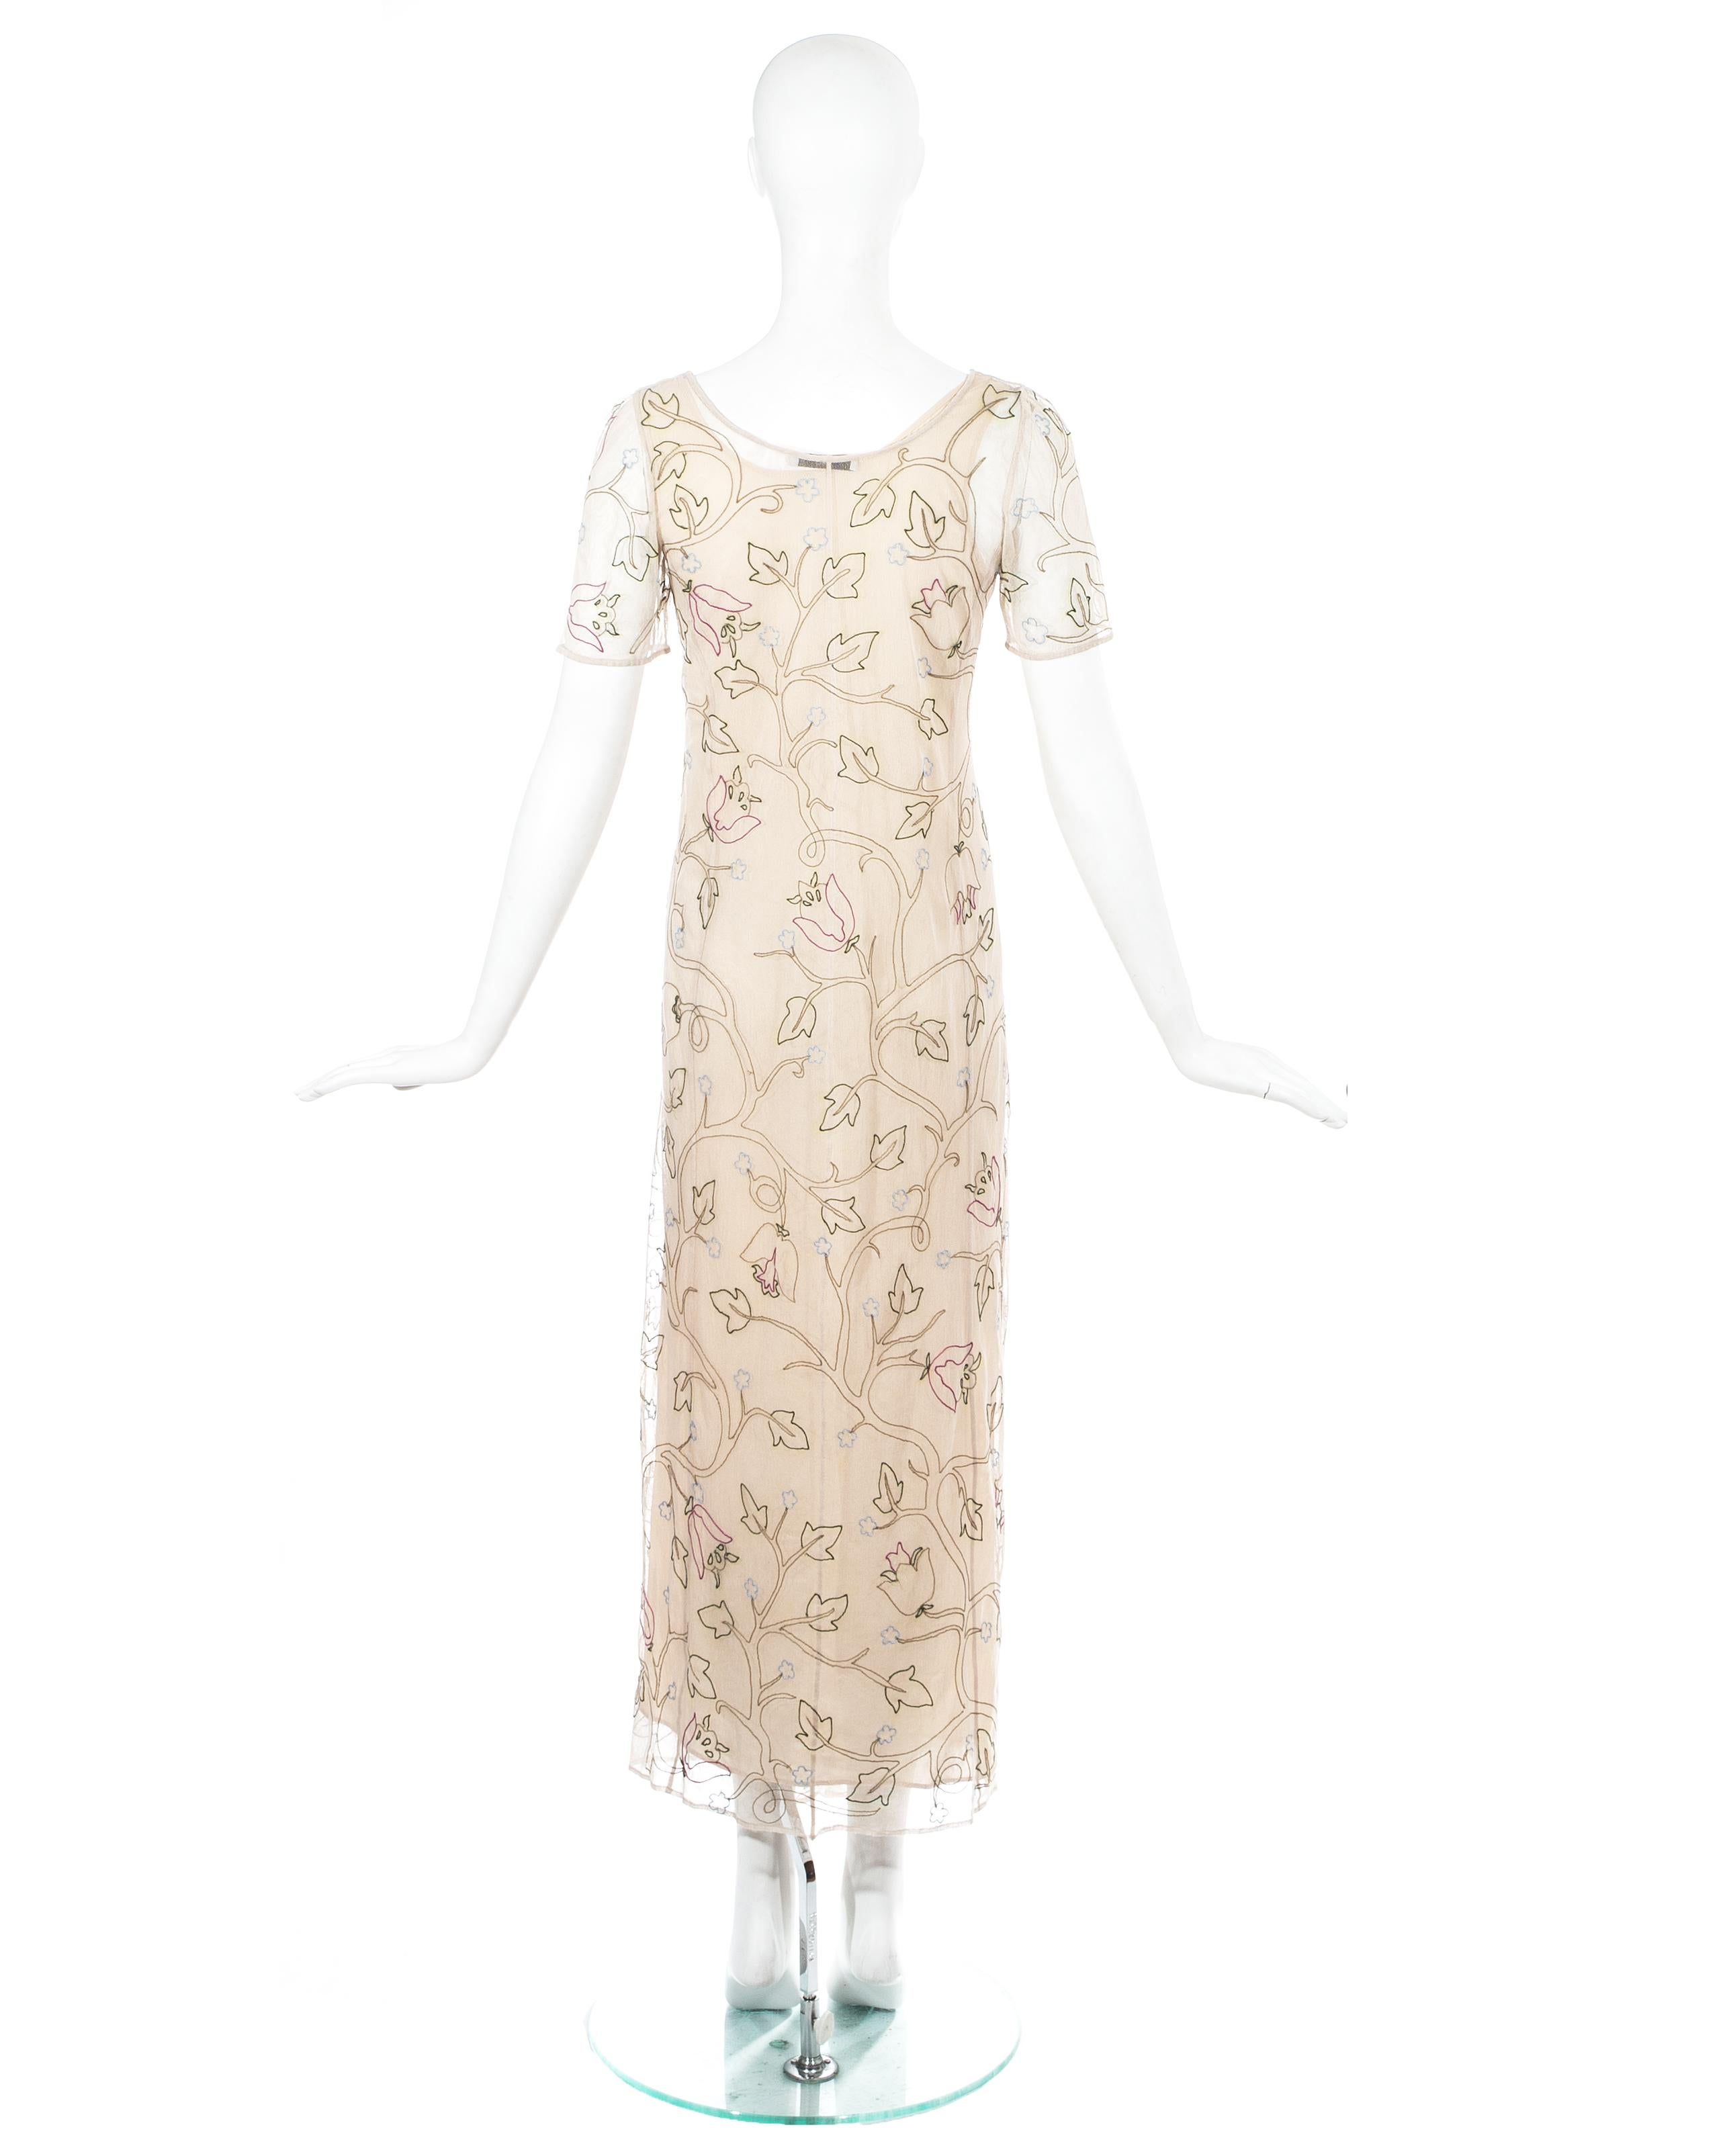 Prada nude mesh evening dress with floral embroidery, ss 1997 For Sale 5